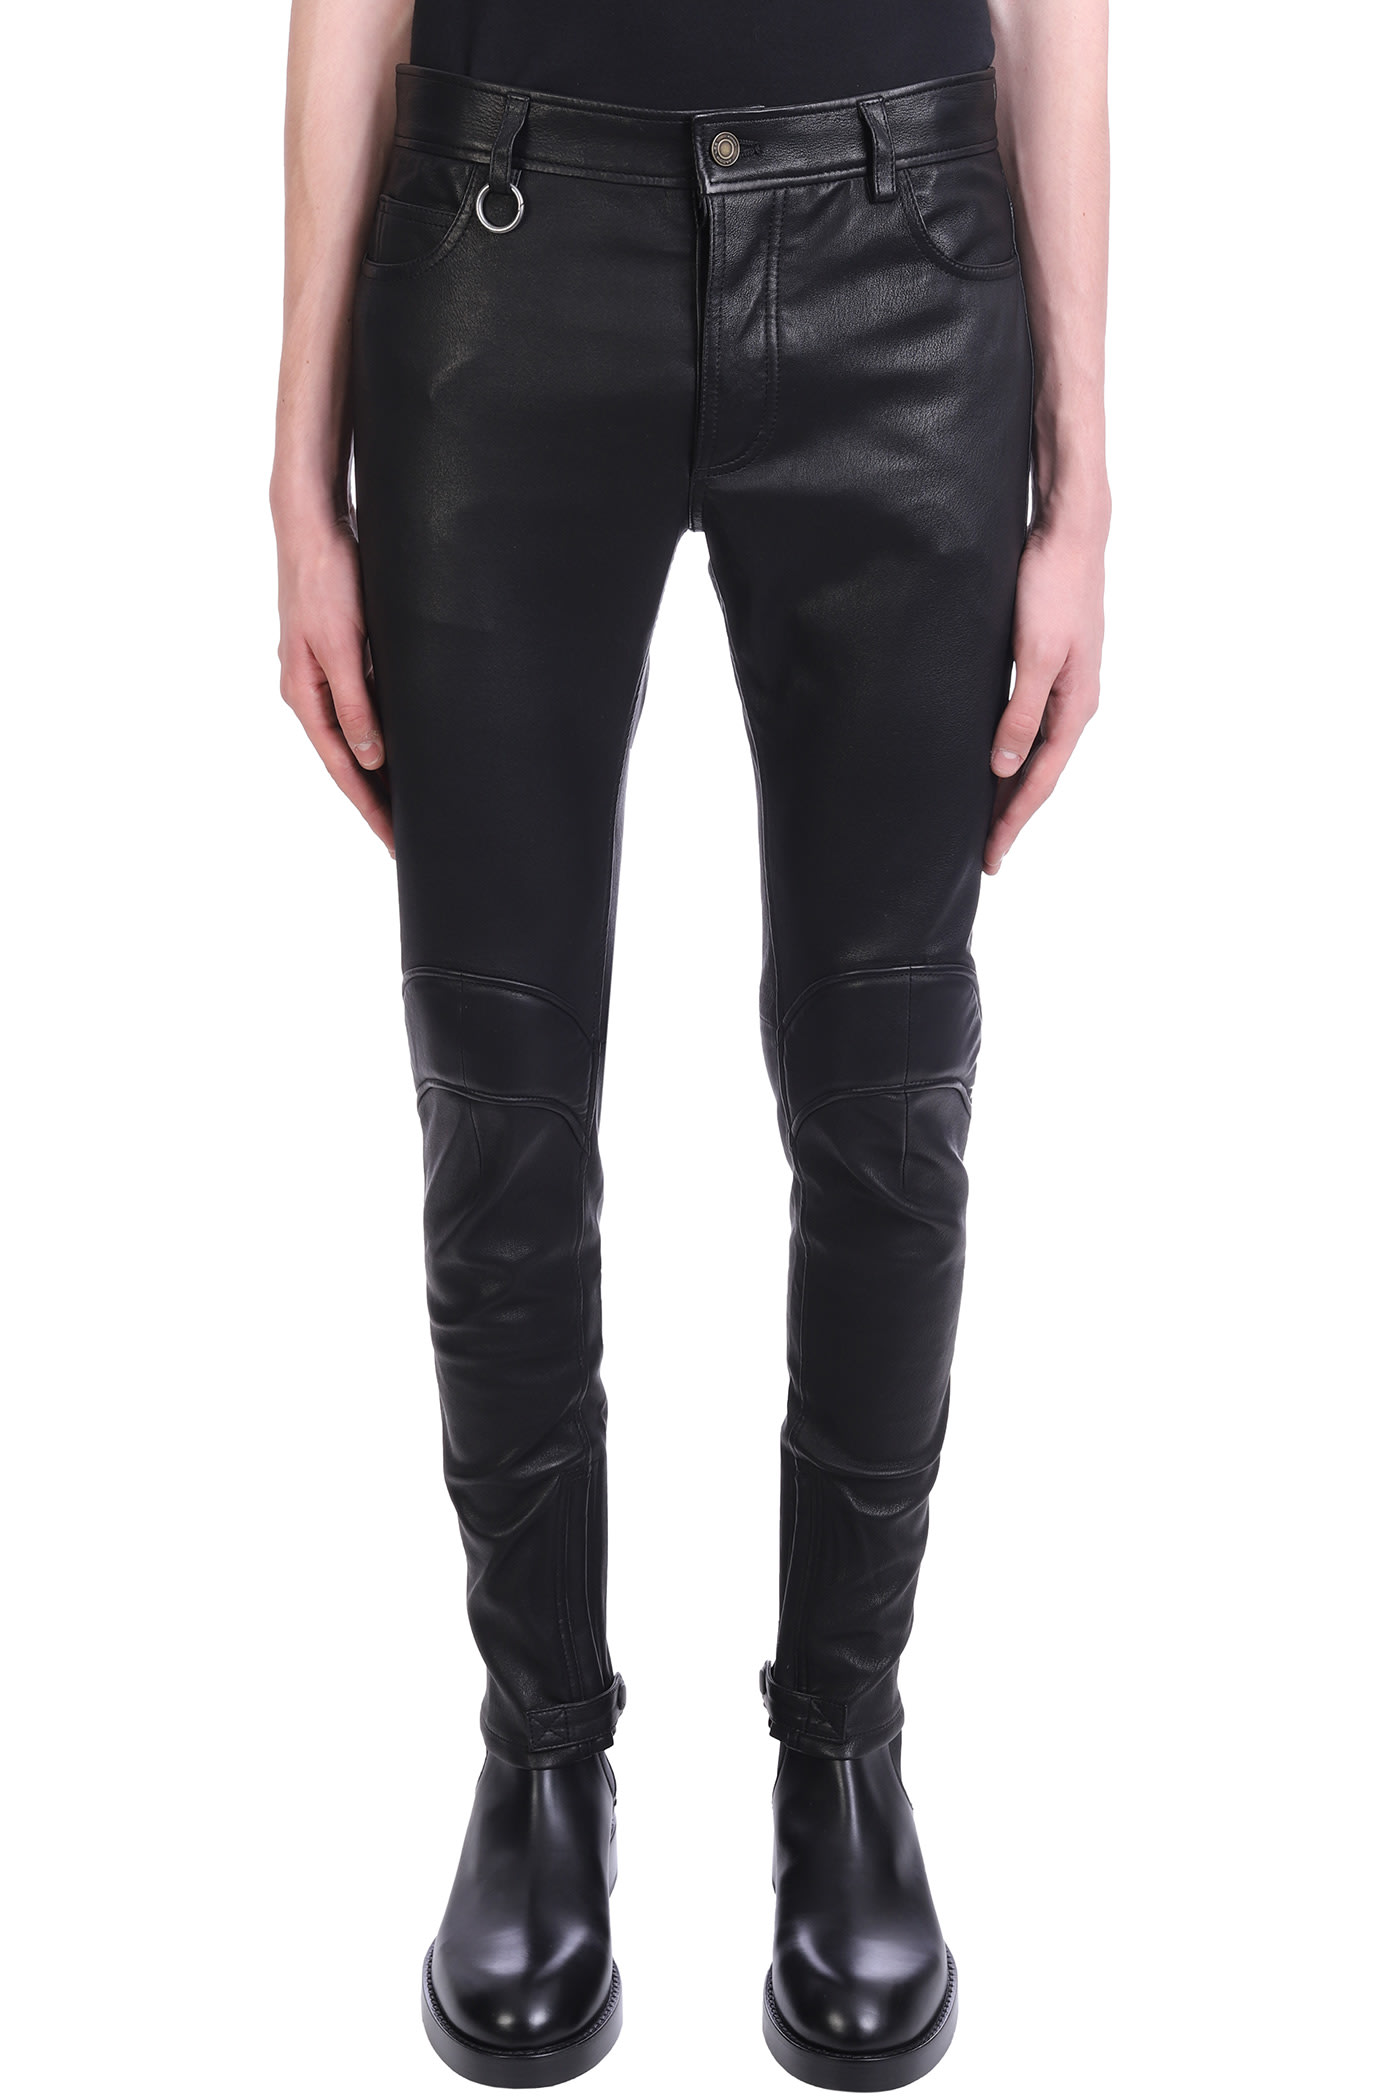 Jacob Lee Pants In Black Leather